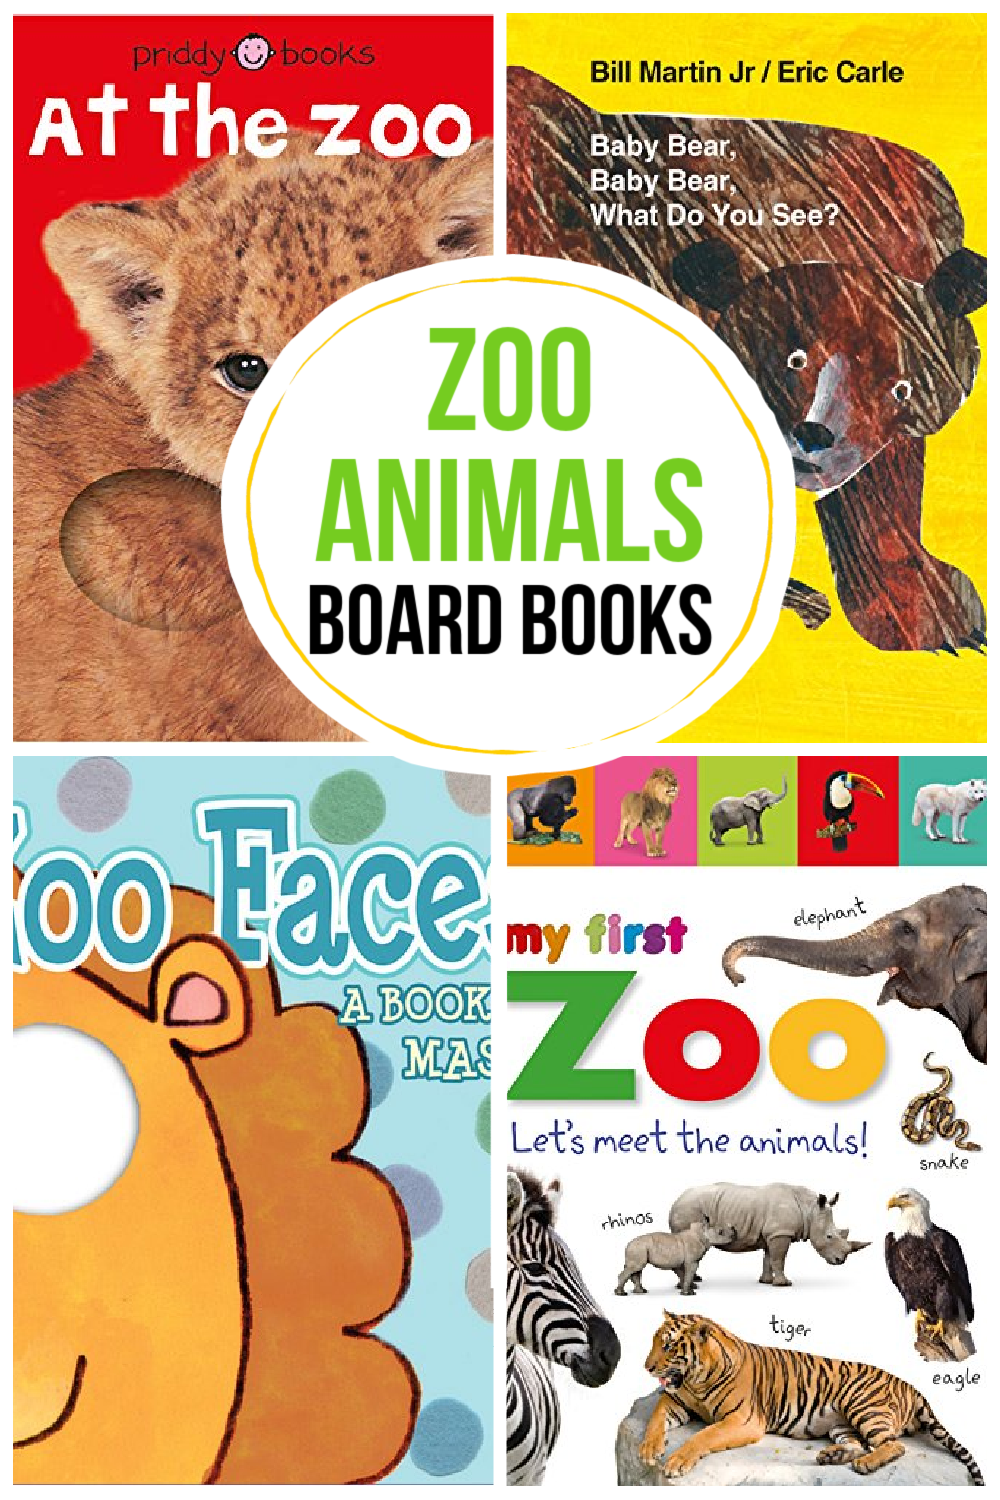 Zoo Animal Books for Toddlers